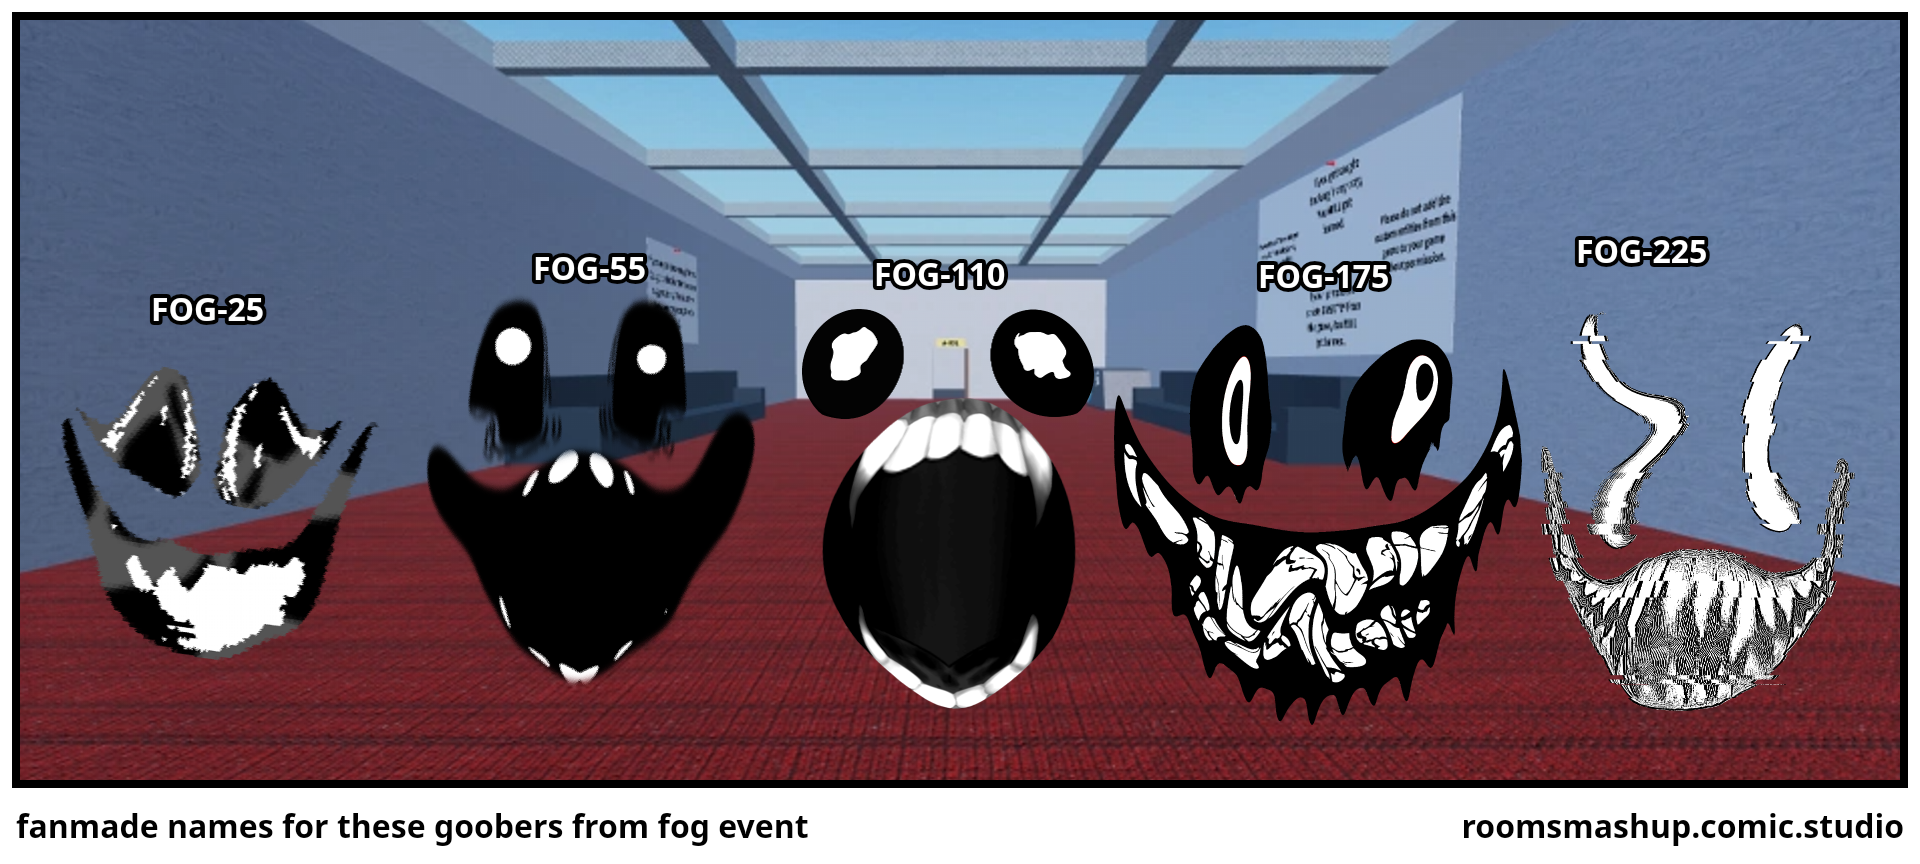 fanmade names for these goobers from fog event